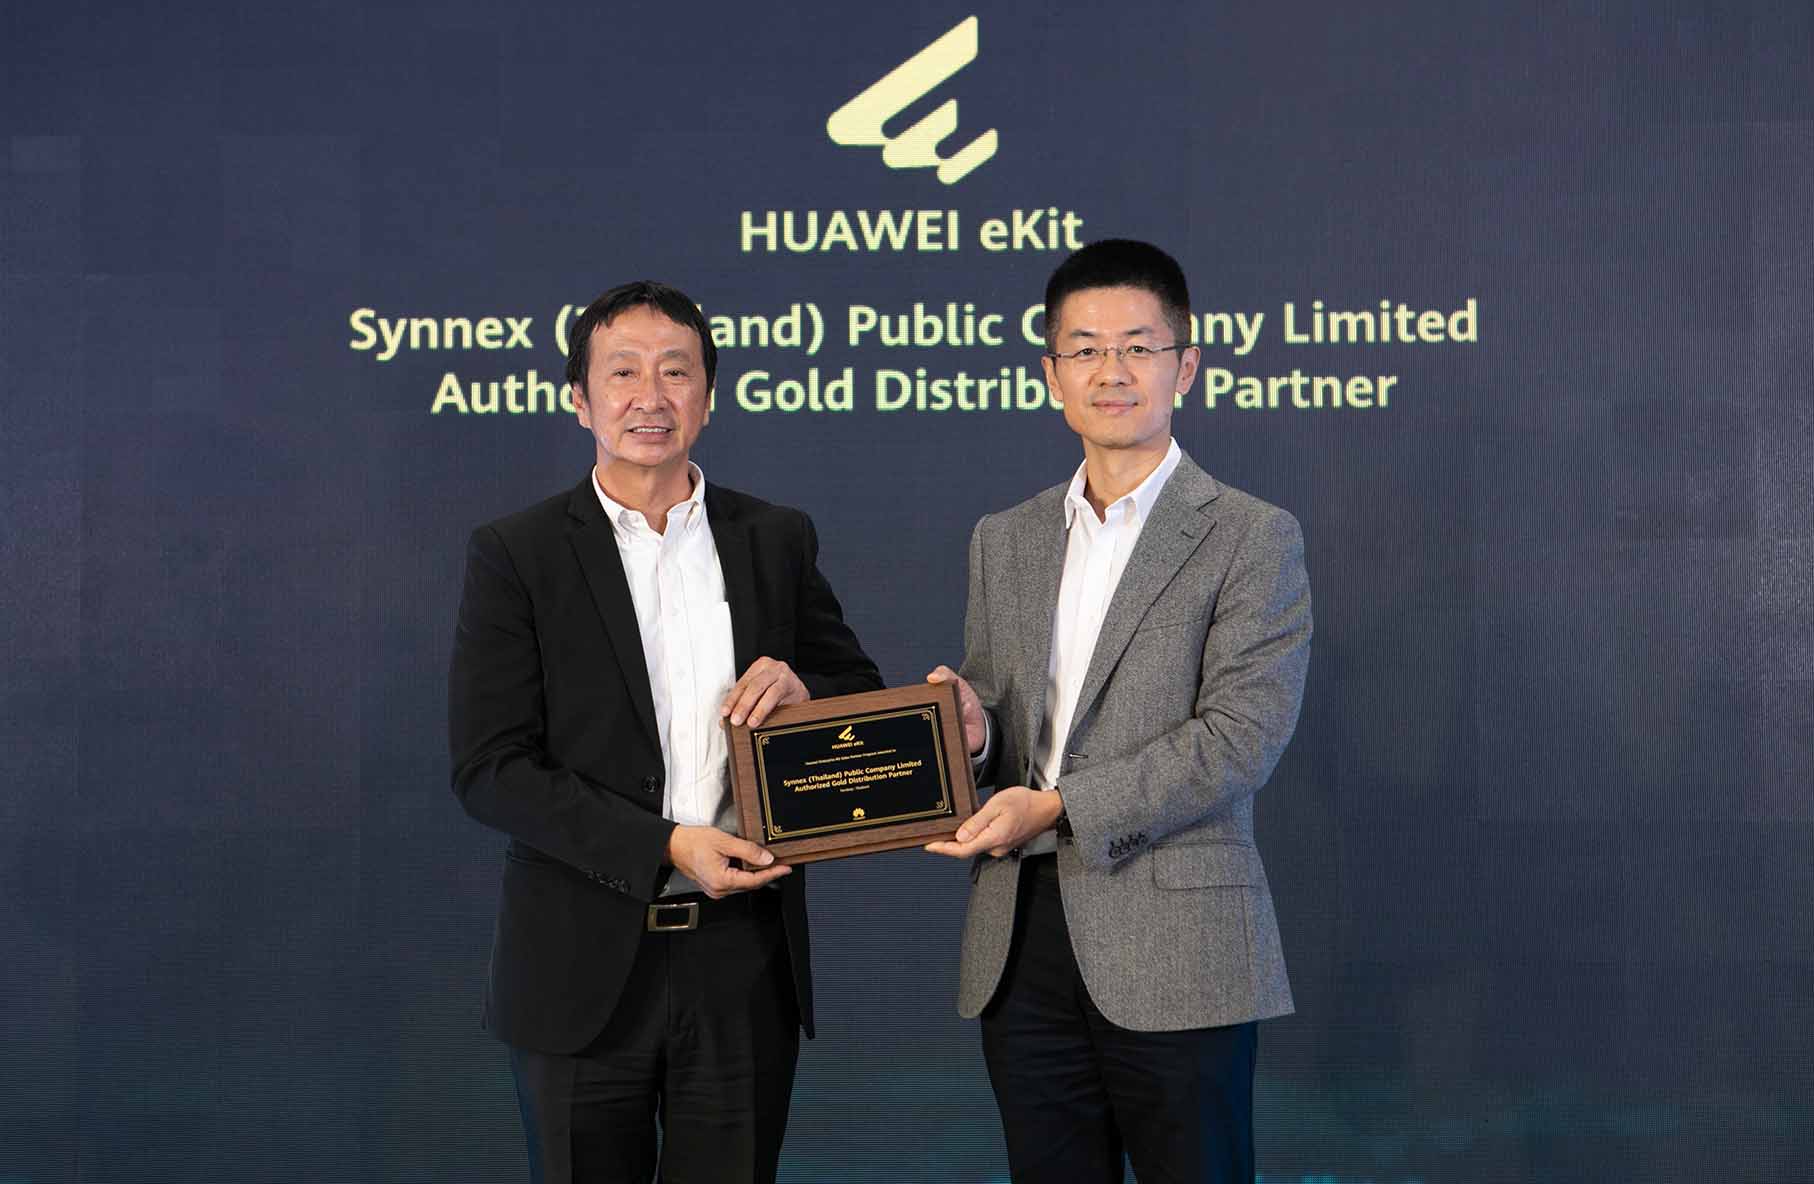 Synnex (Thailand) was appointed as HUAWEI eKit Gold Distribution Partner in Thailand